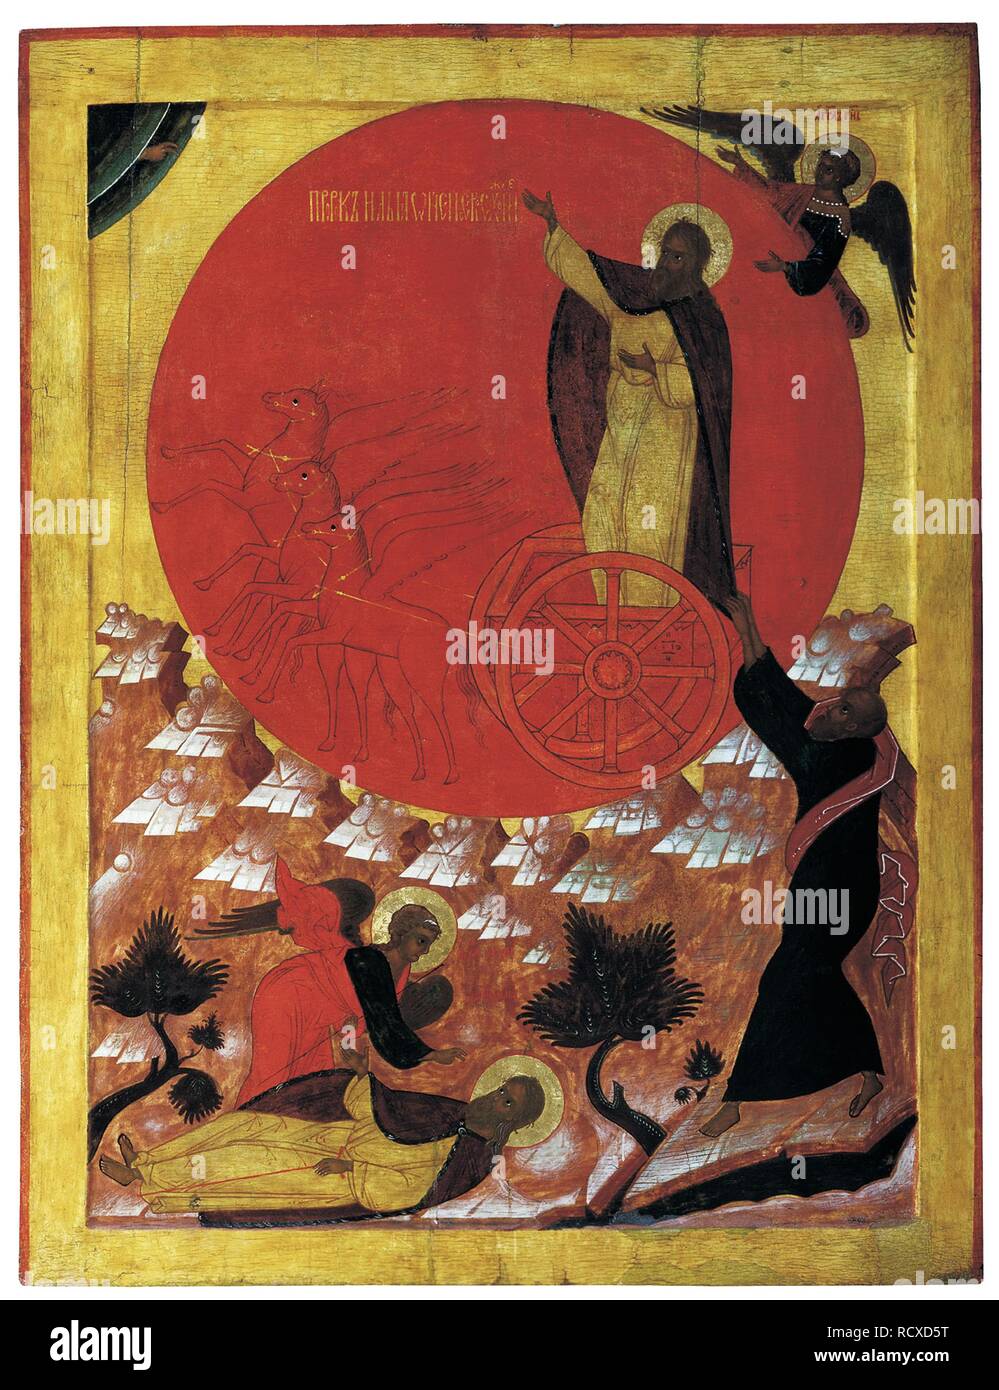 The Prophet Elijah and the Fiery Chariot. Museum: Regional Art Museum, Solvychegodsk. Author: Russian icon. Stock Photo